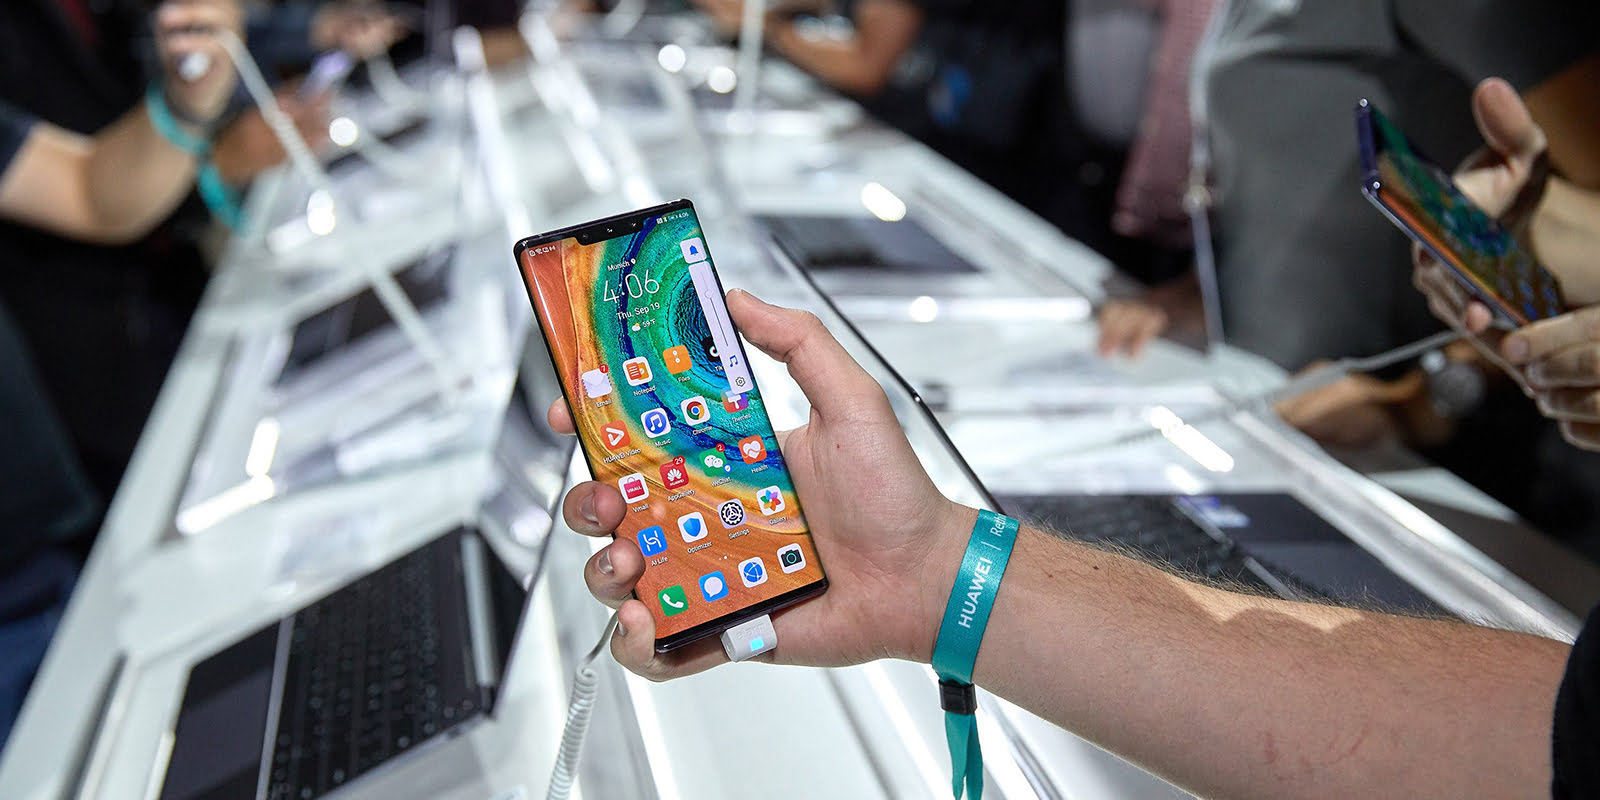 Huawei Mate 30 Pro in hands at Huawei Event